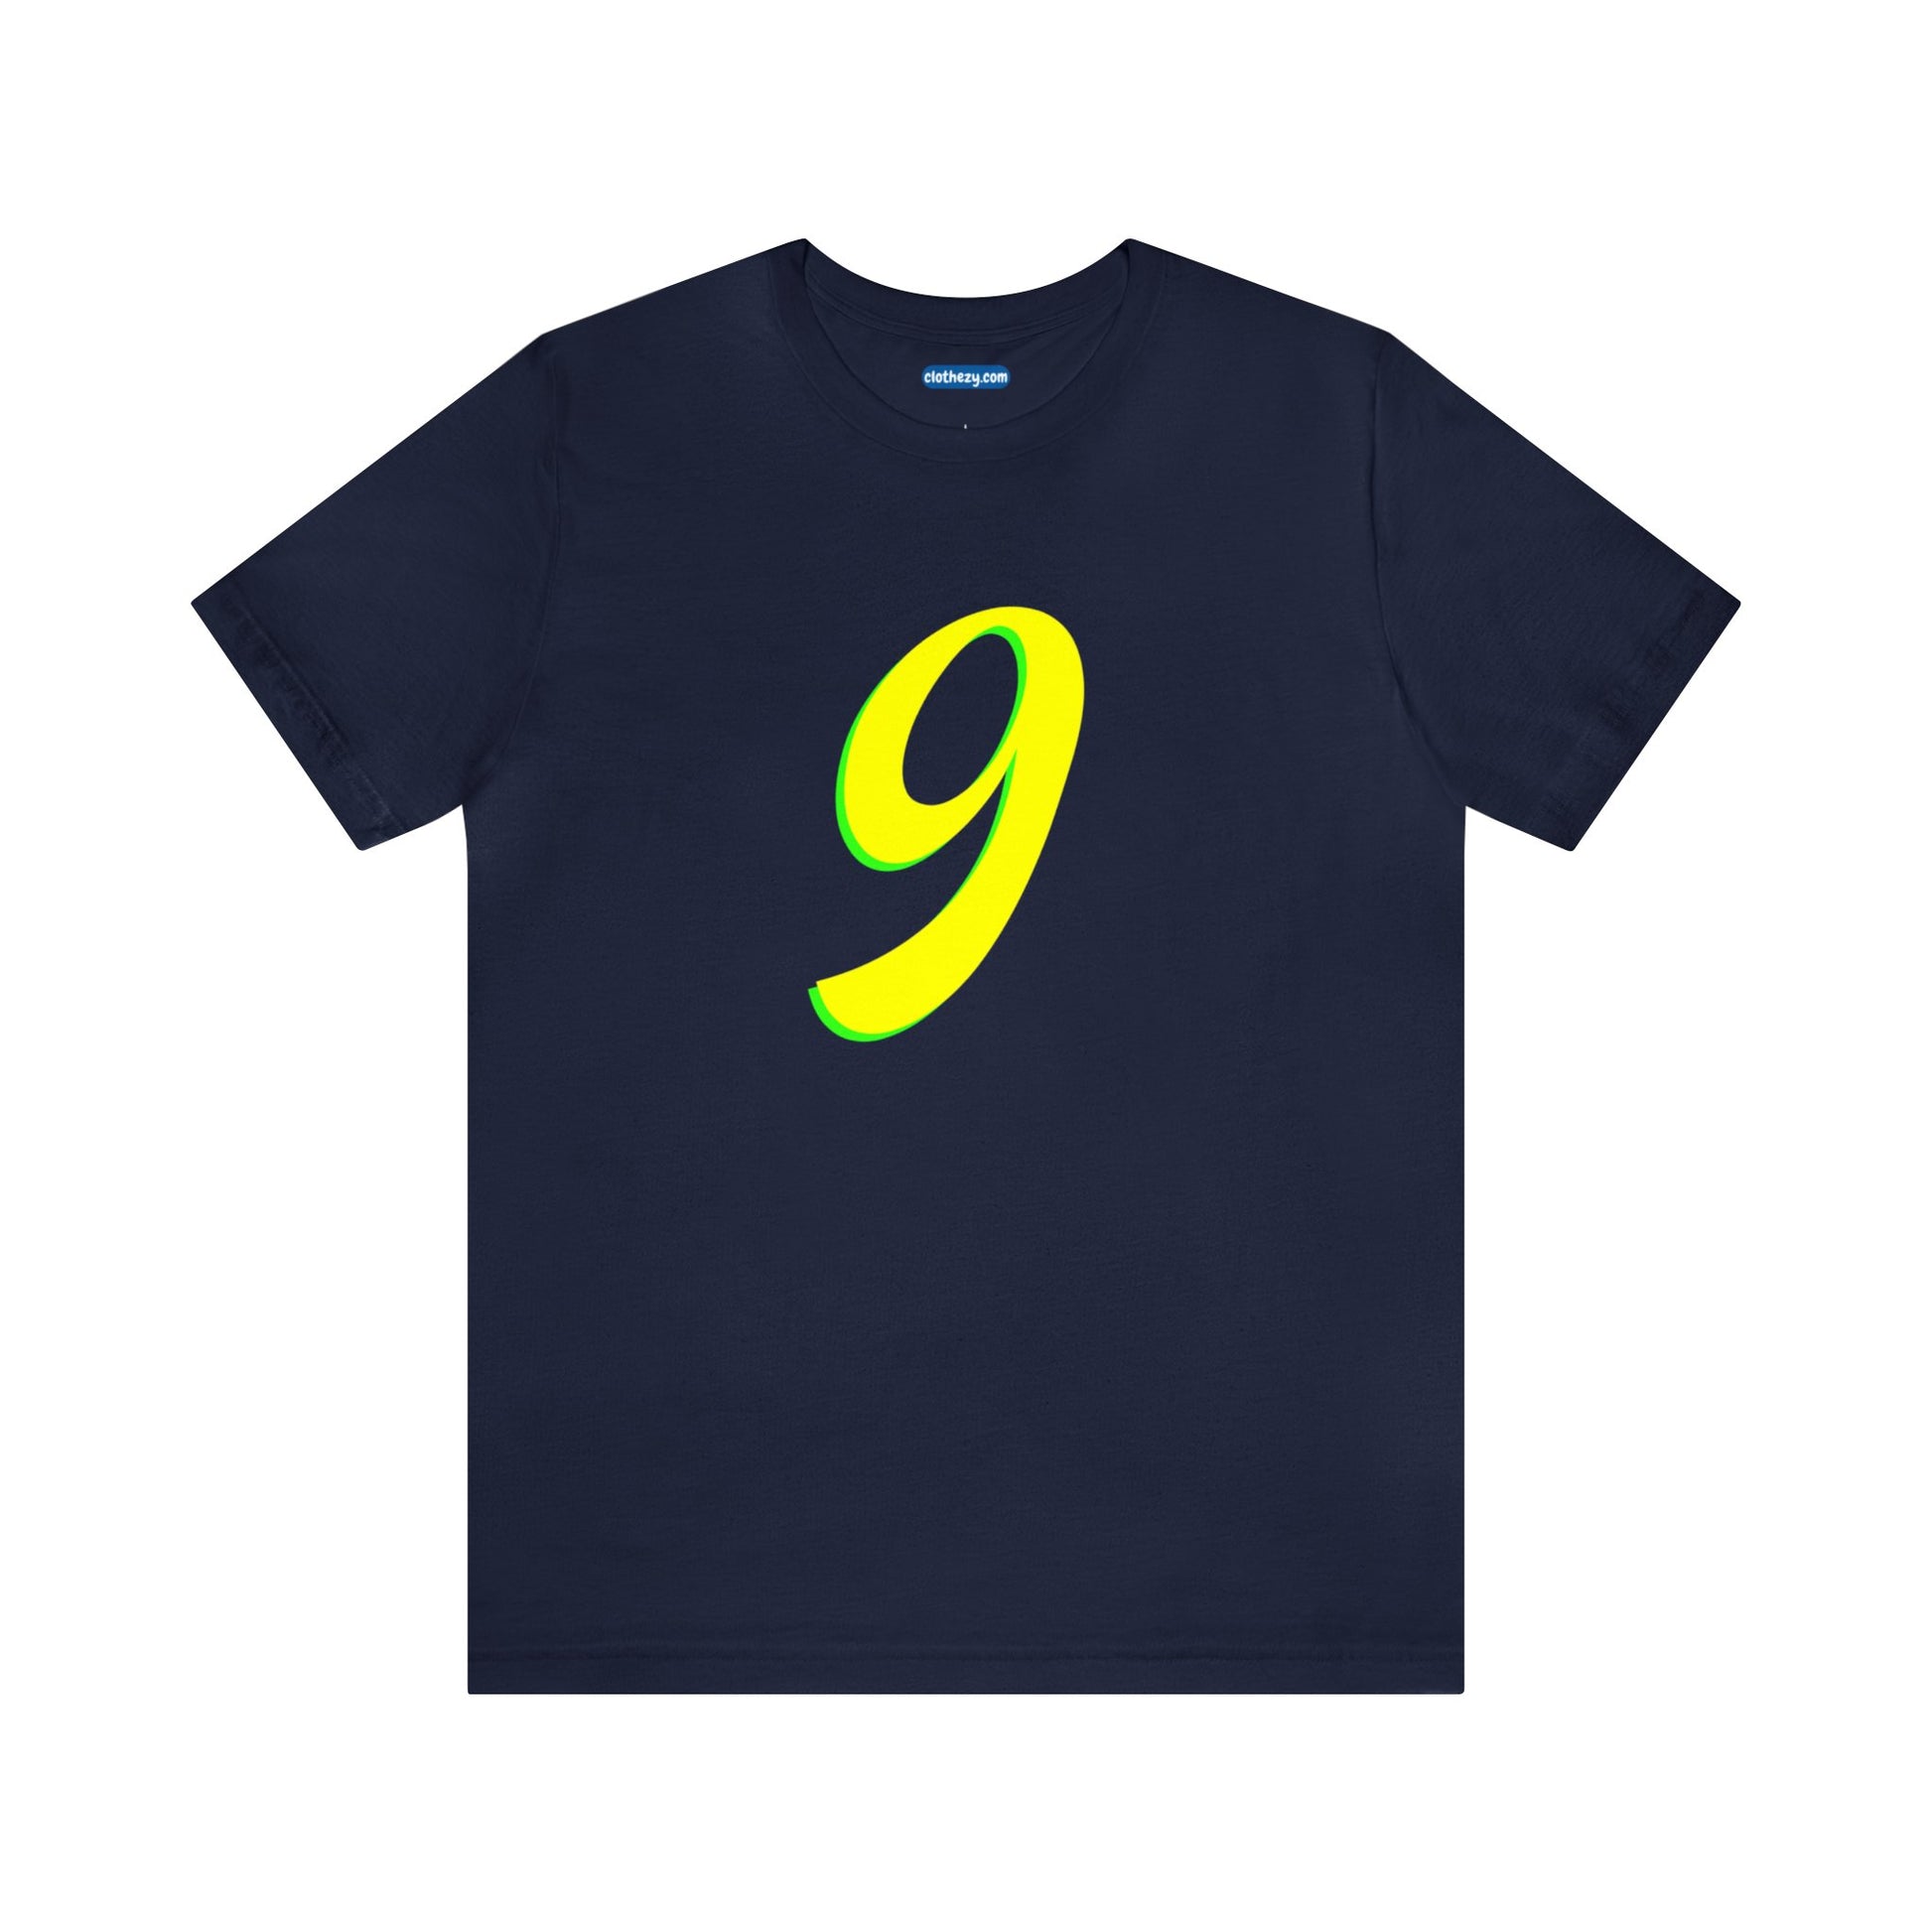 Number 9 Design - Soft Cotton Tee for birthdays and celebrations, Gift for friends and family, Multiple Options by clothezy.com in Navy Size Small - Buy Now